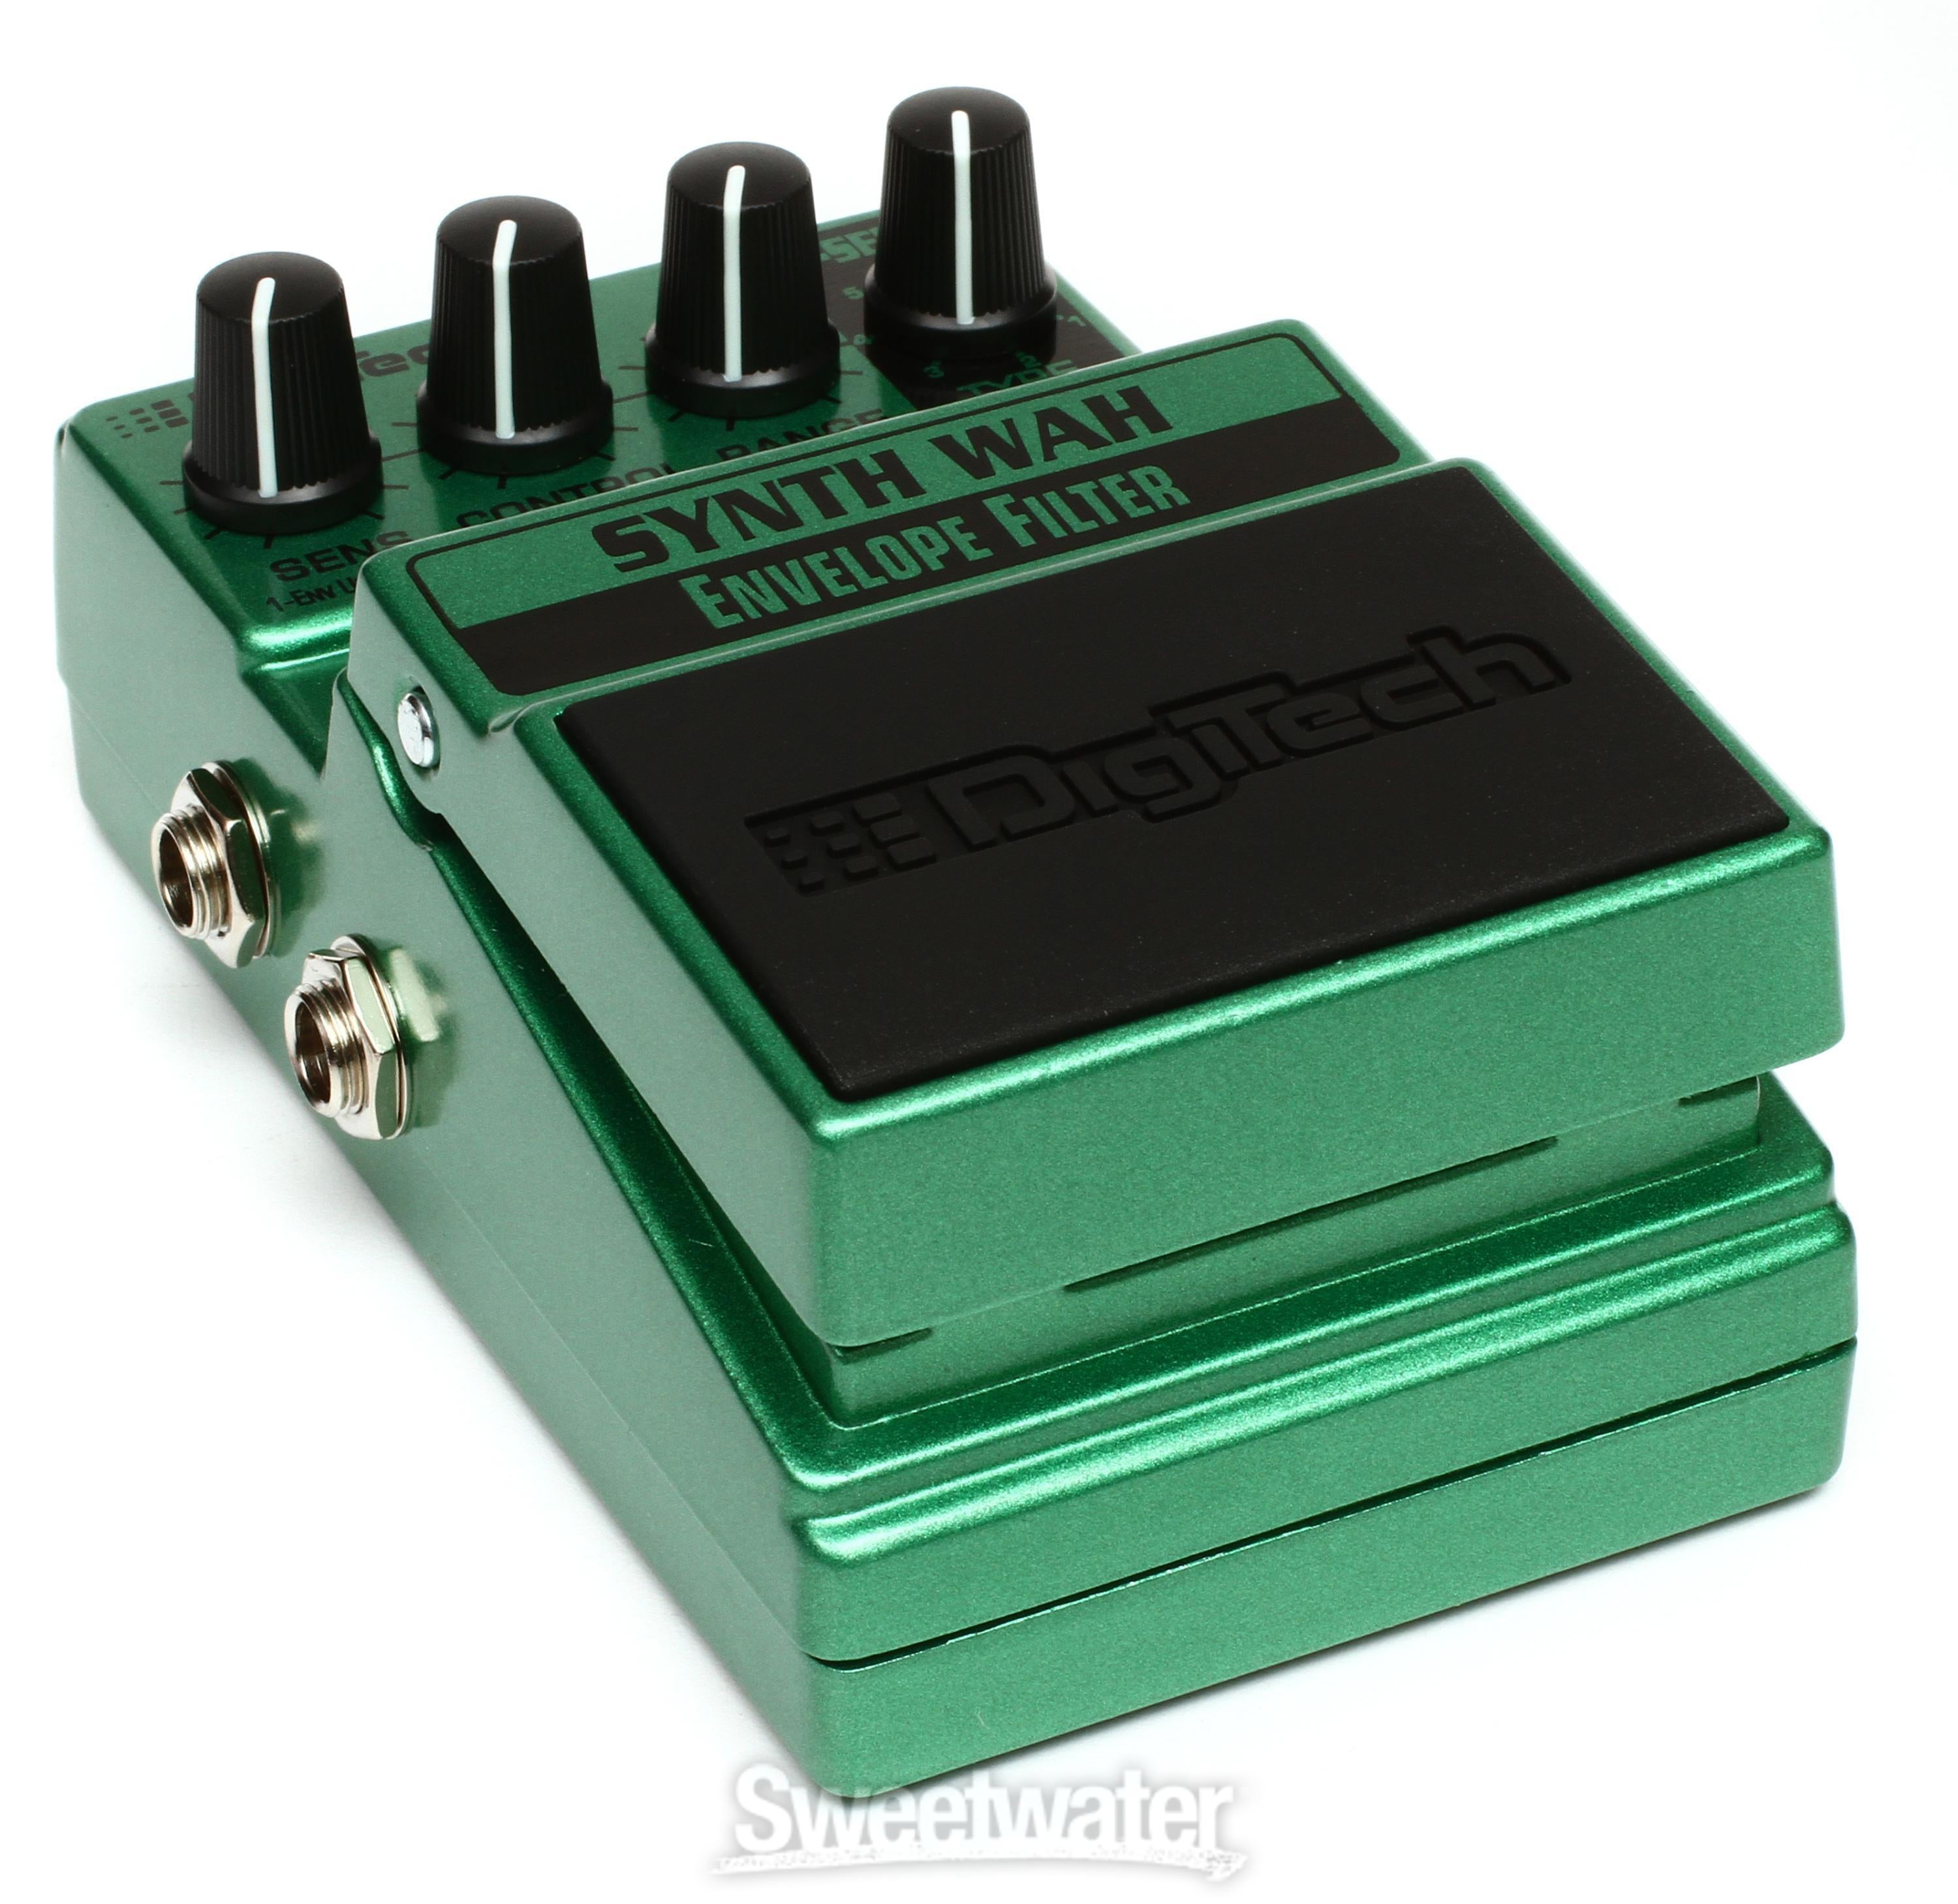 DigiTech Synth Wah Envelope Filter Pedal | Sweetwater